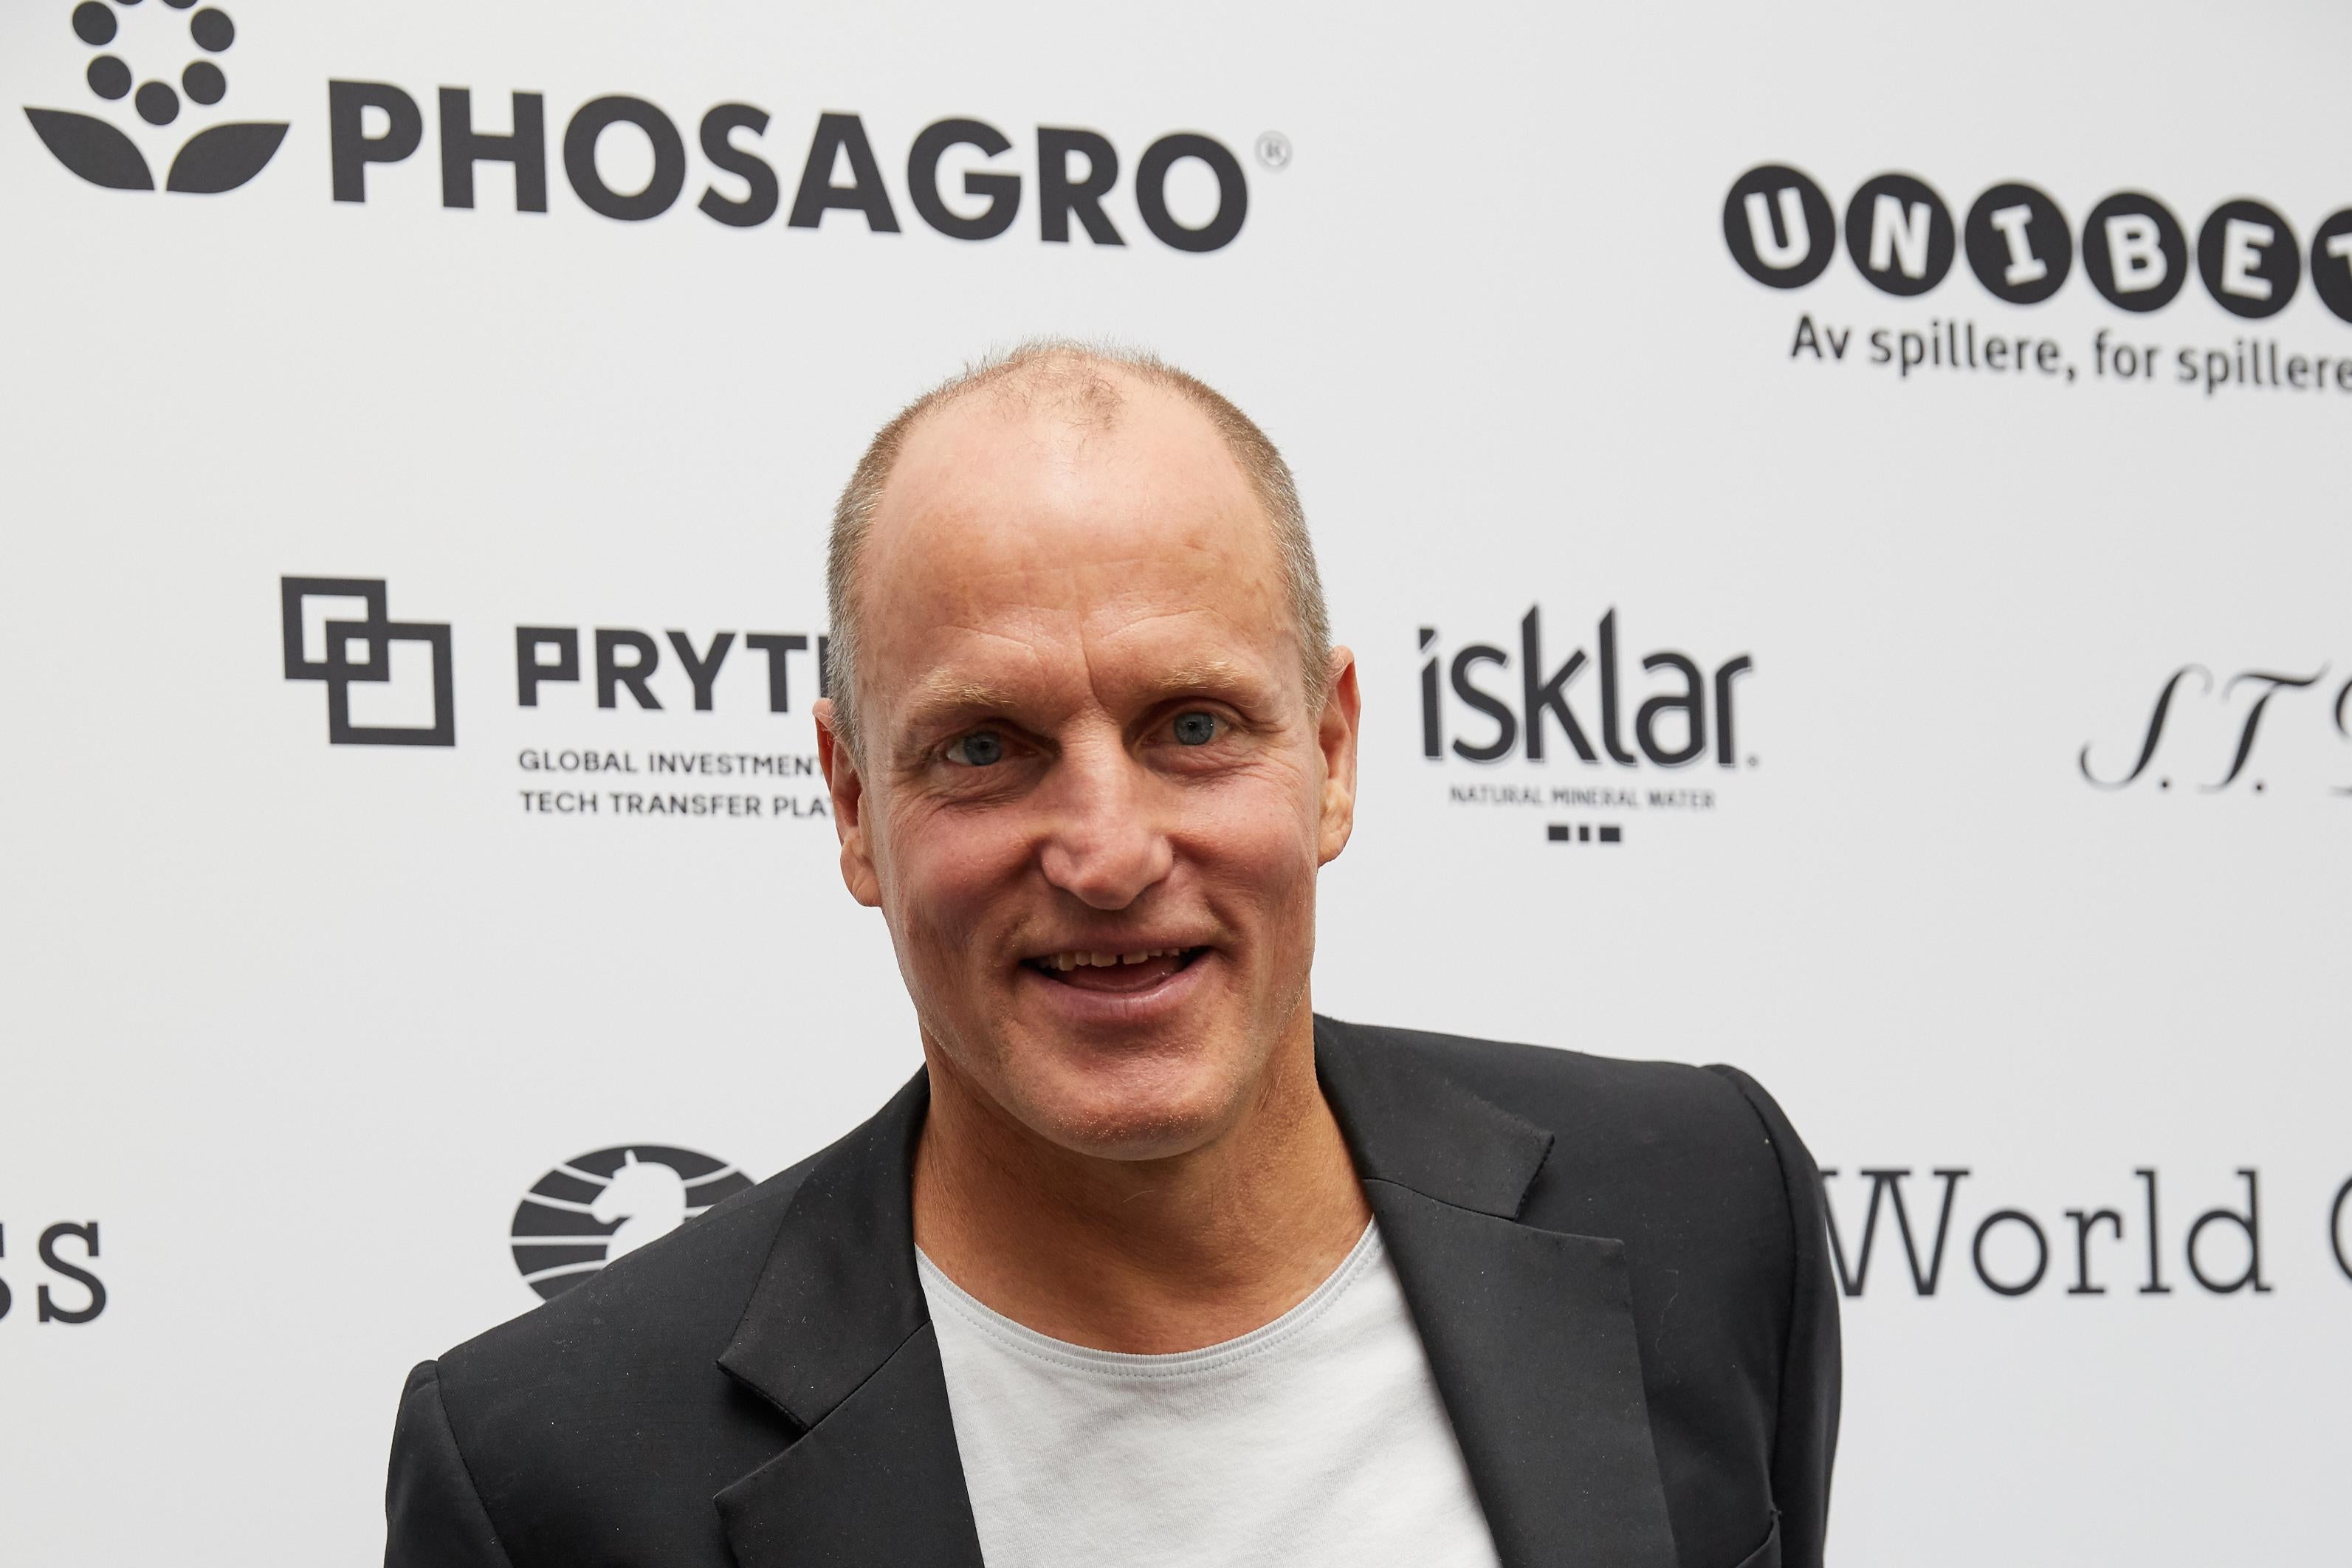 Woody Harrelson attends smiles, wearing a white shirt and black suit.